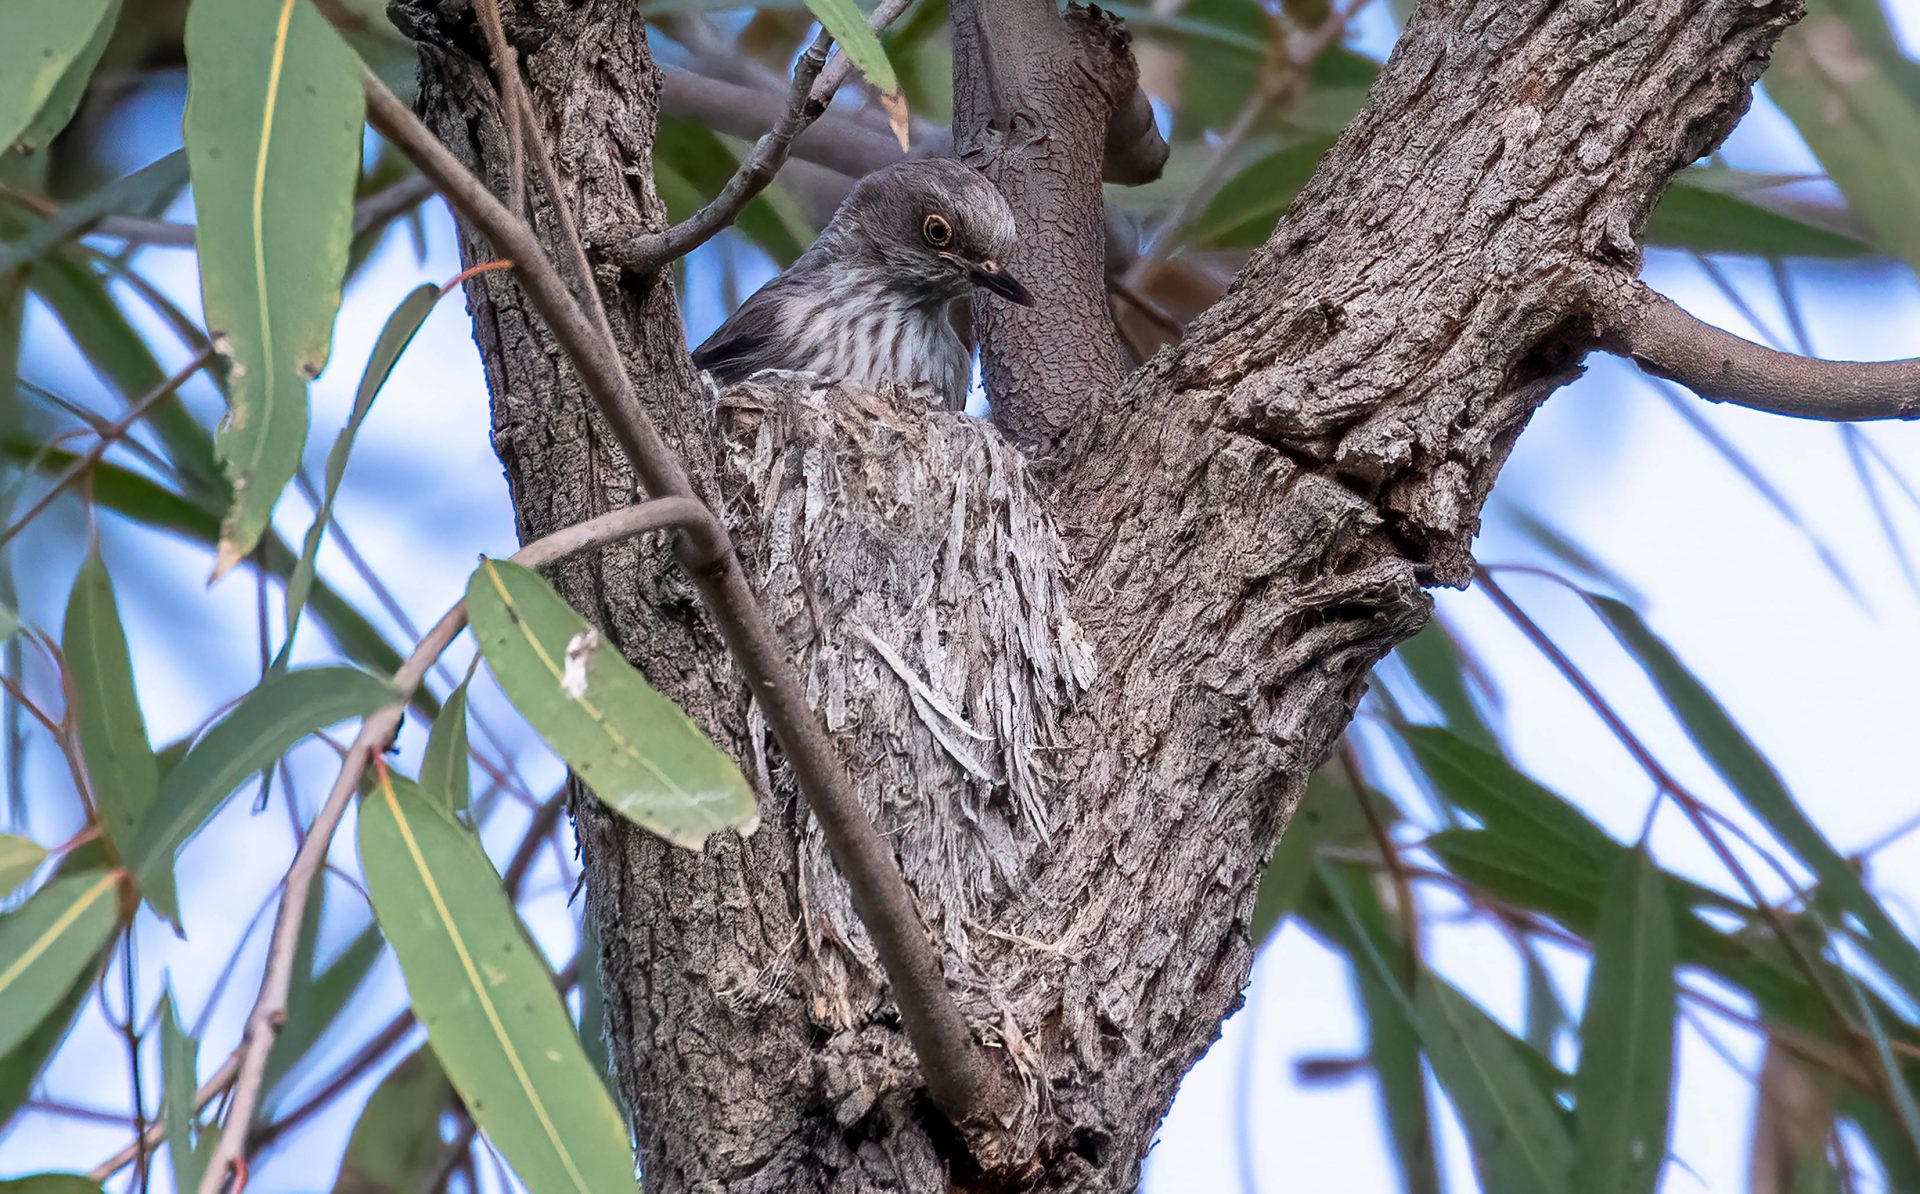 showing varied sittella sitting on well-camouflaged nest structure